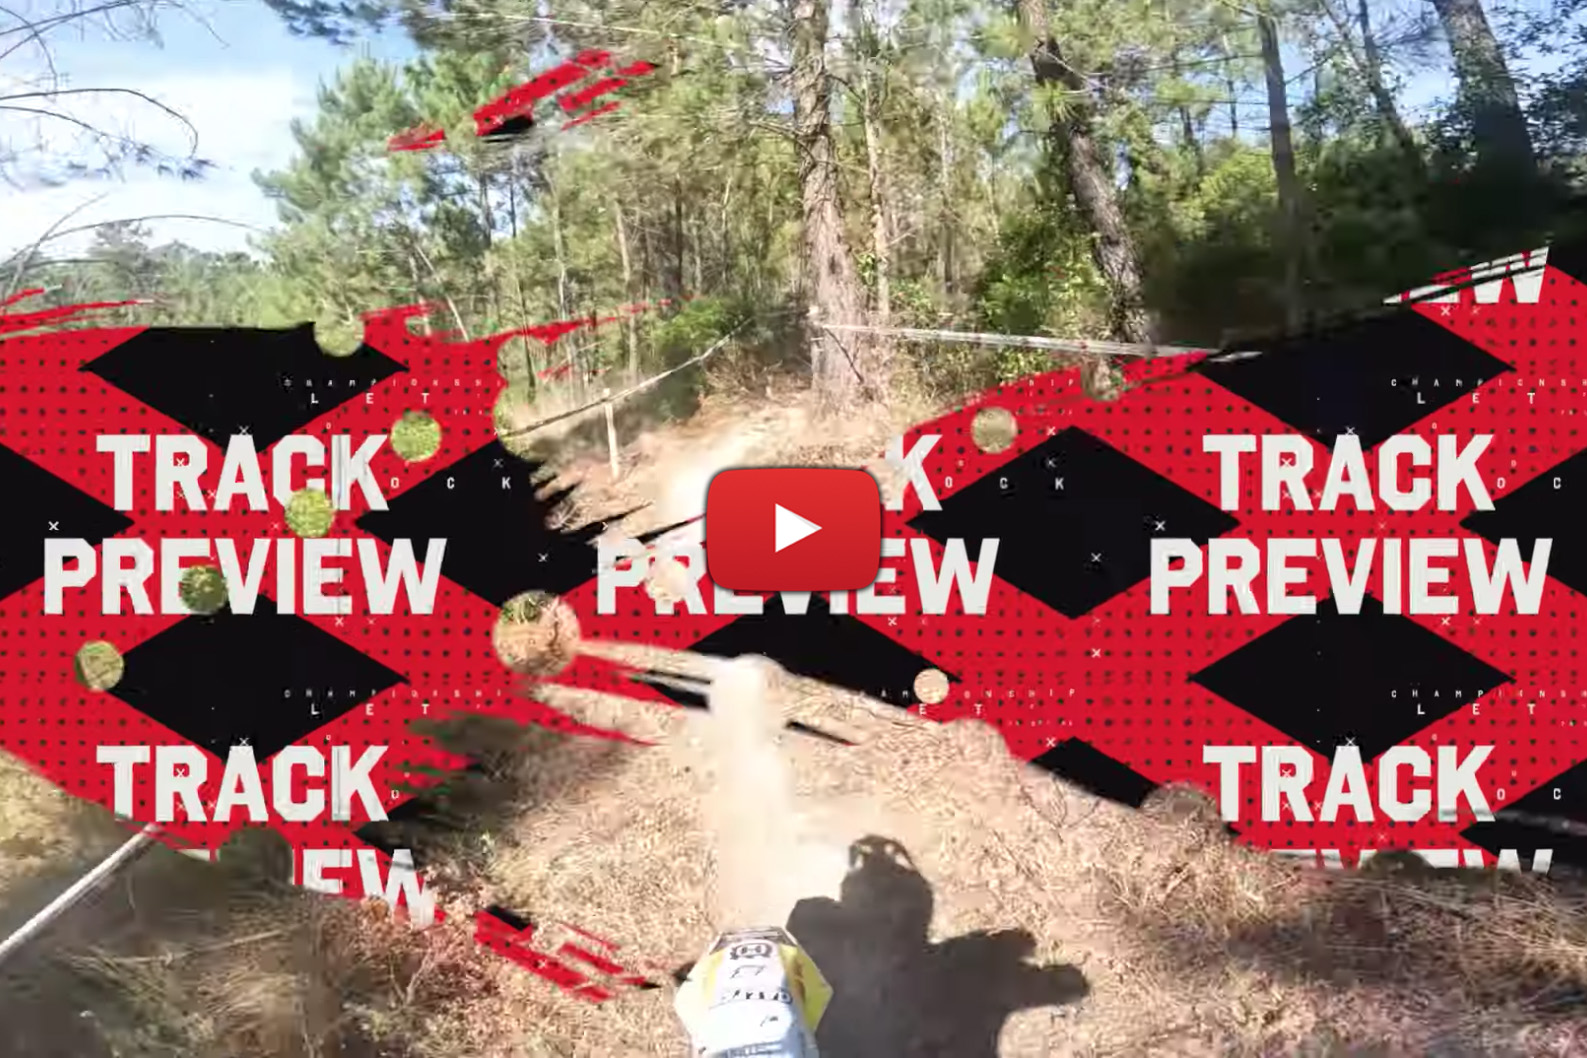 EnduroGP of Portugal II: Rnd 4 track preview – “flow is the key”